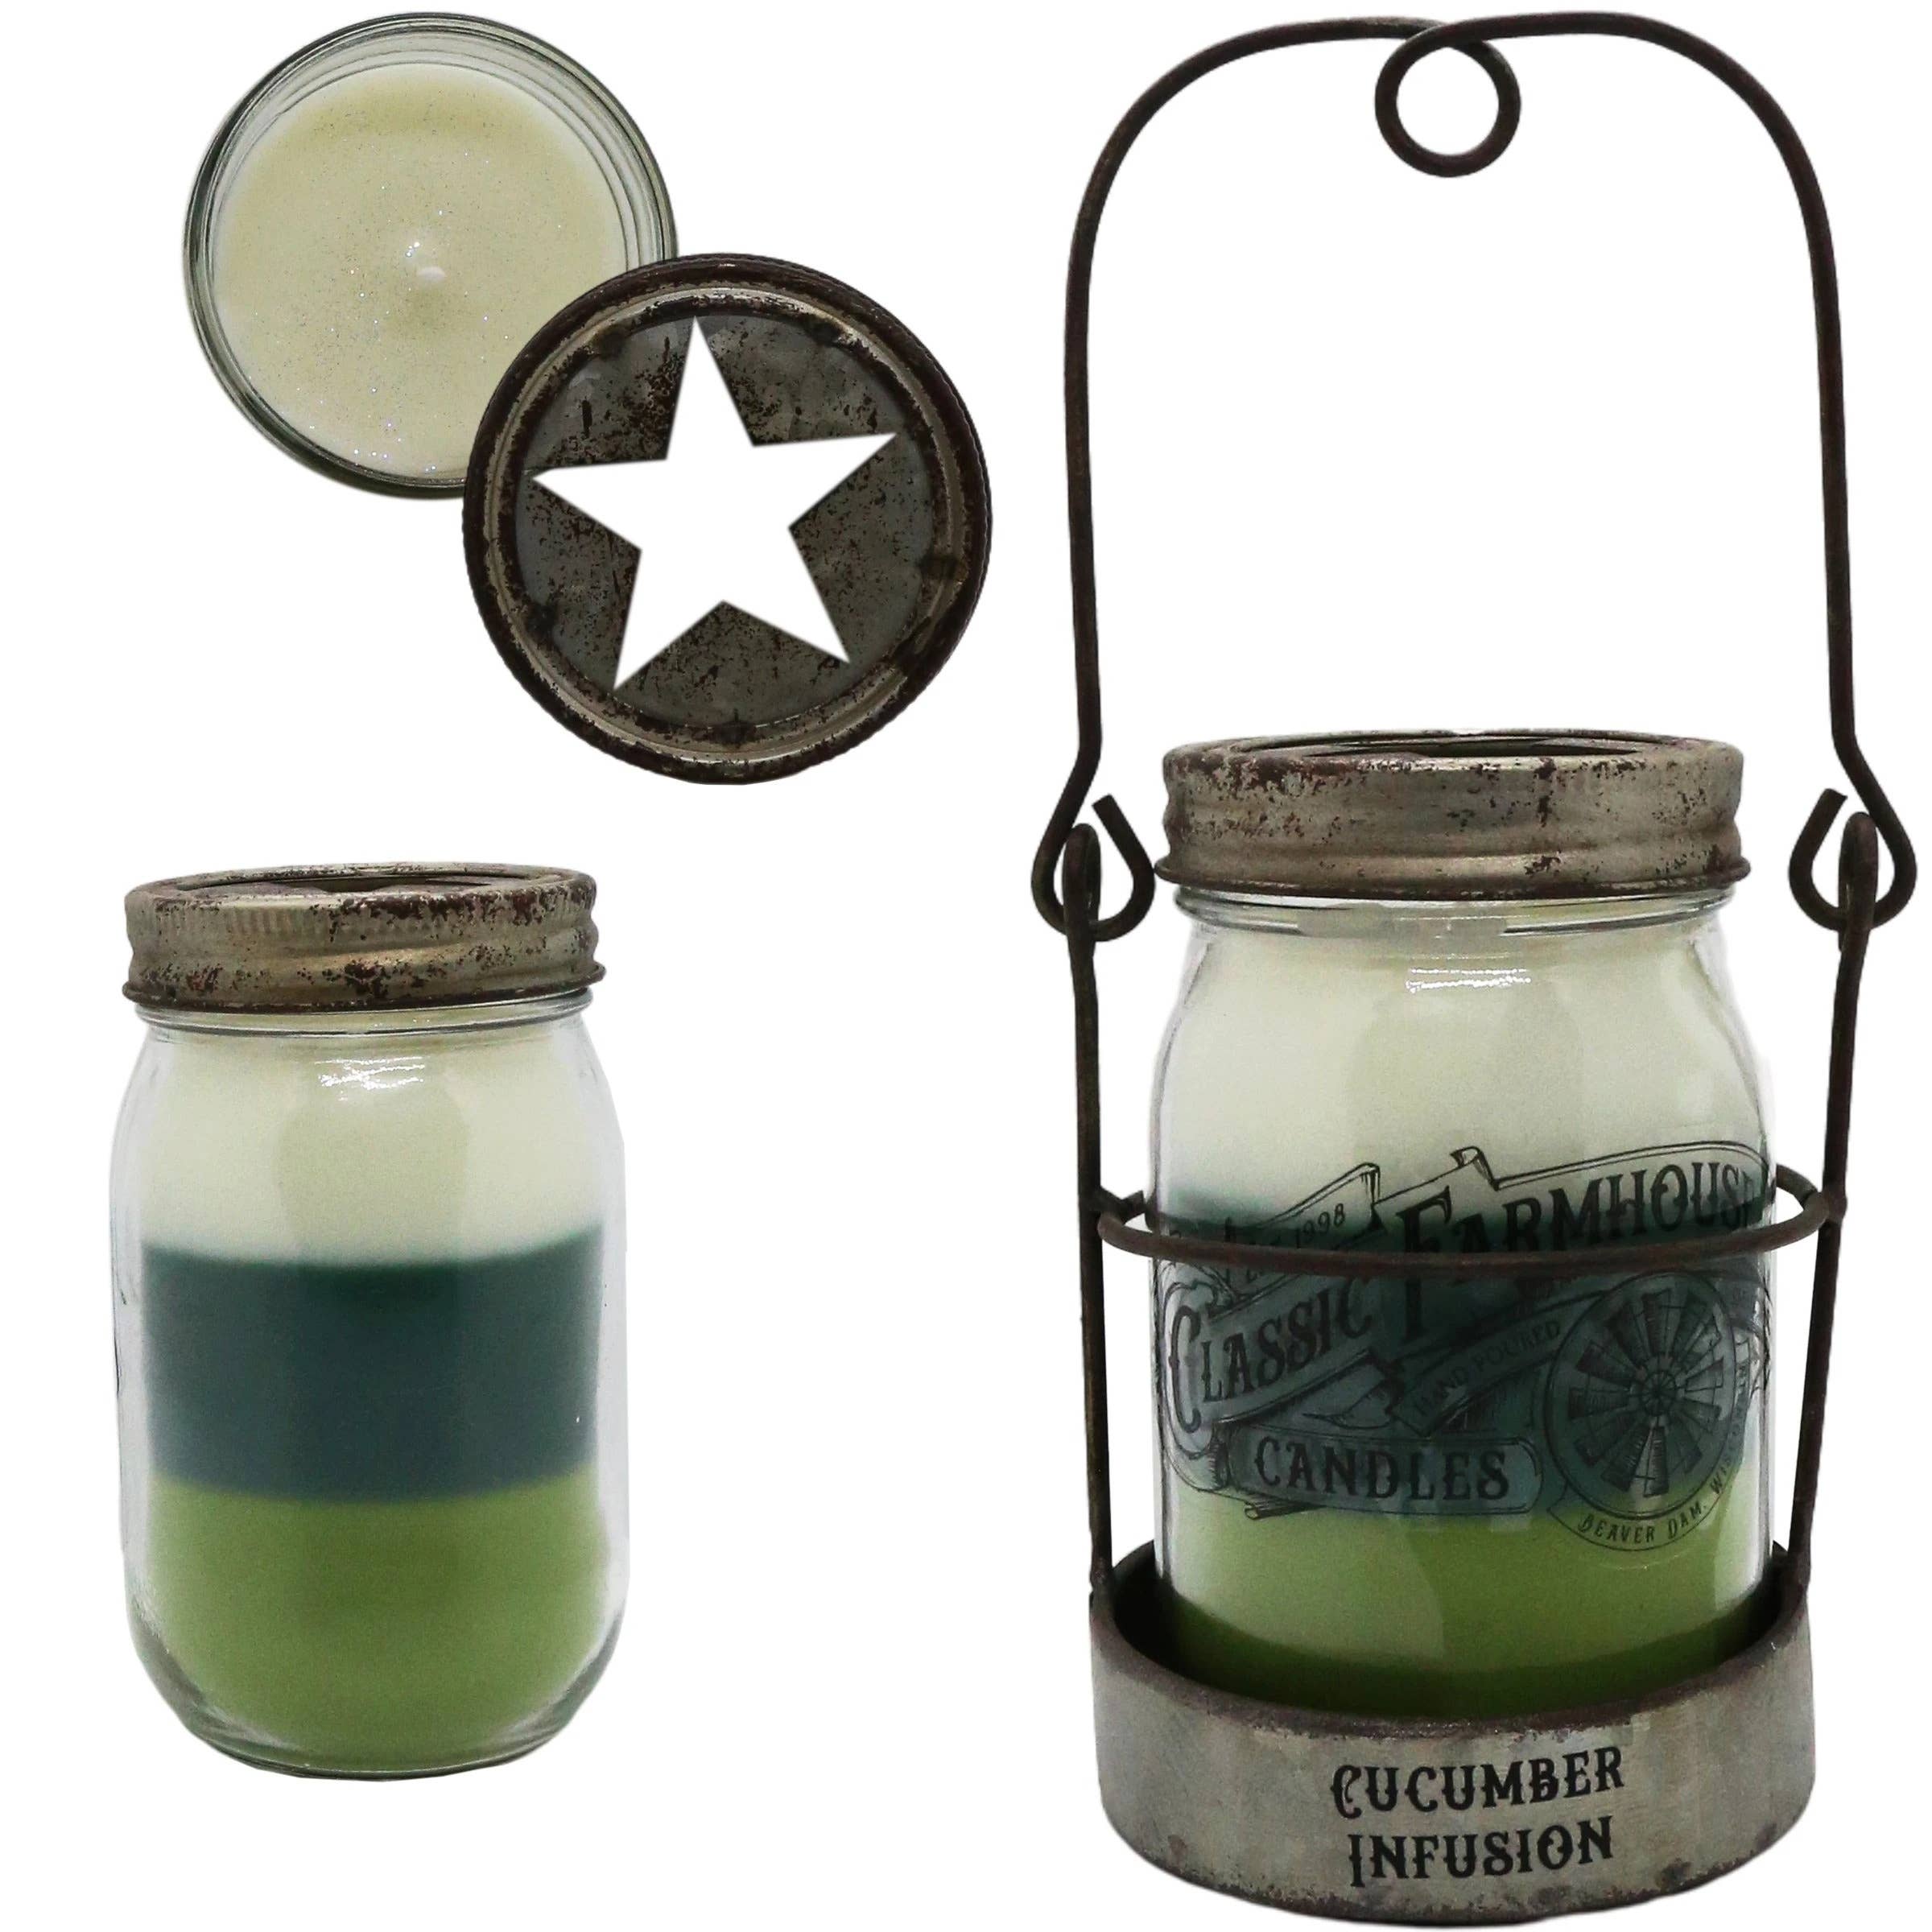 CUCUMBER INFUSION - Classic Farmhouse Candles